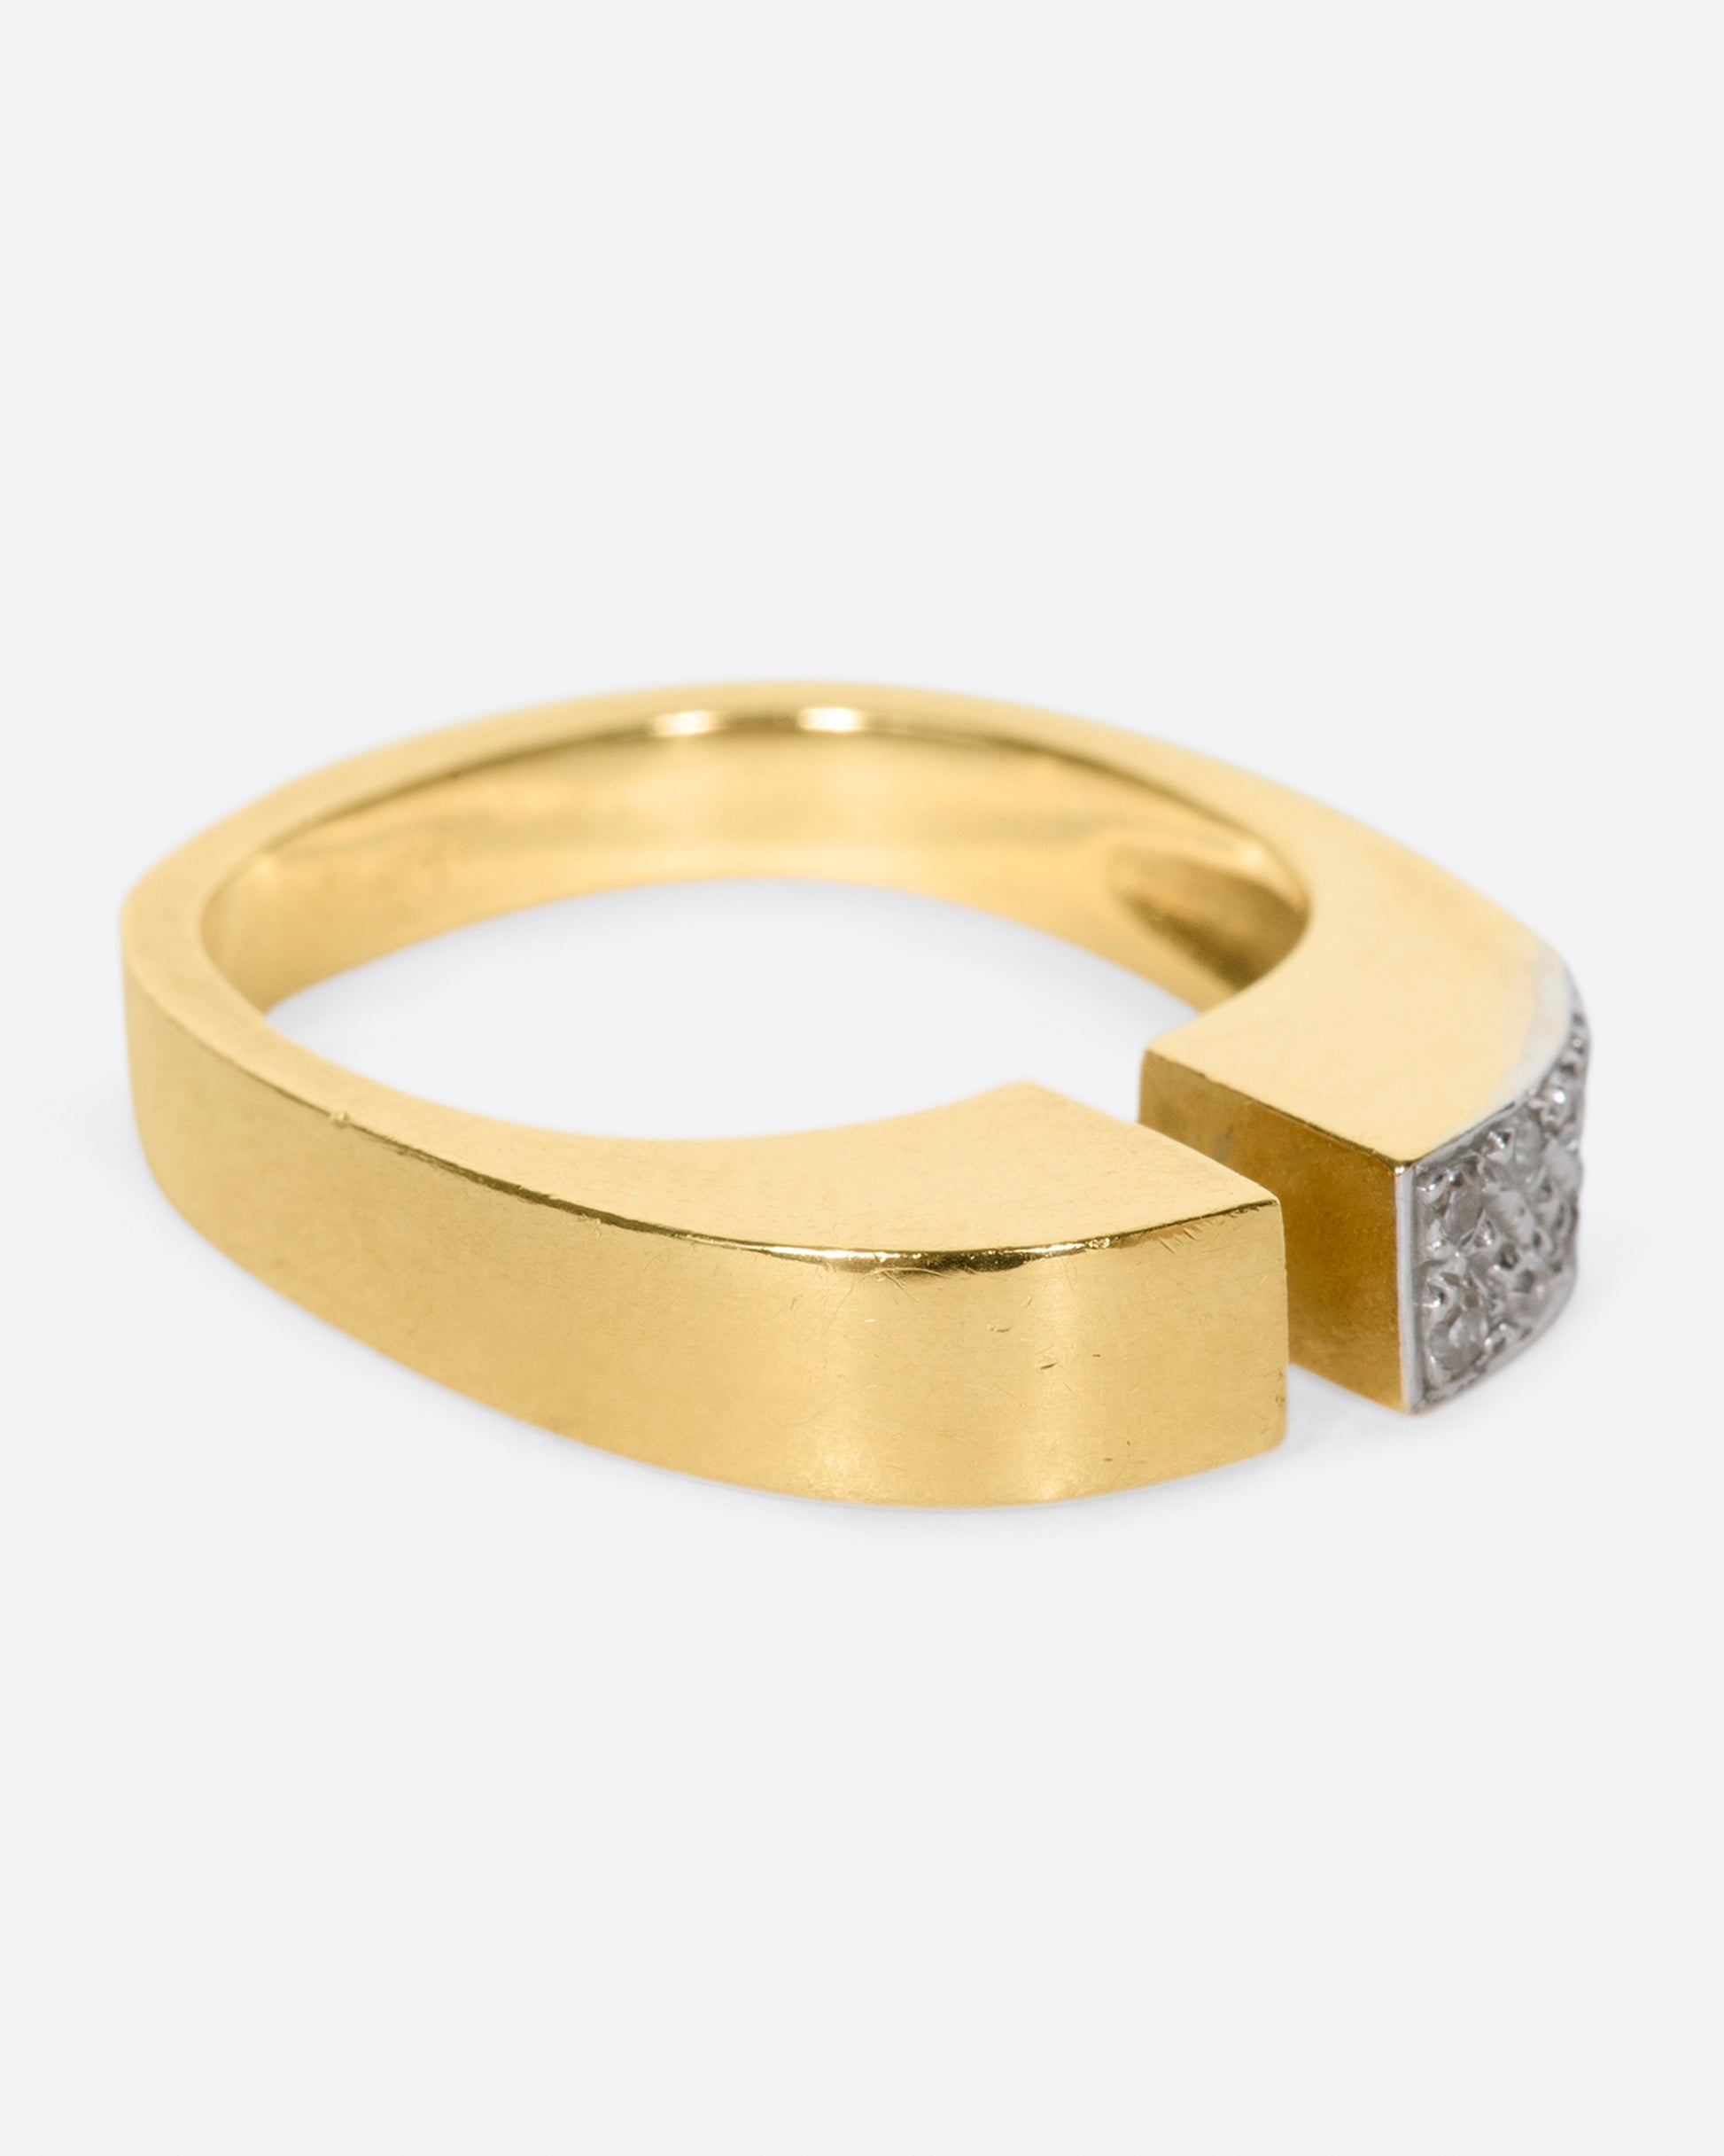 A raised, open, yellow gold ring with one pavé diamond corner.